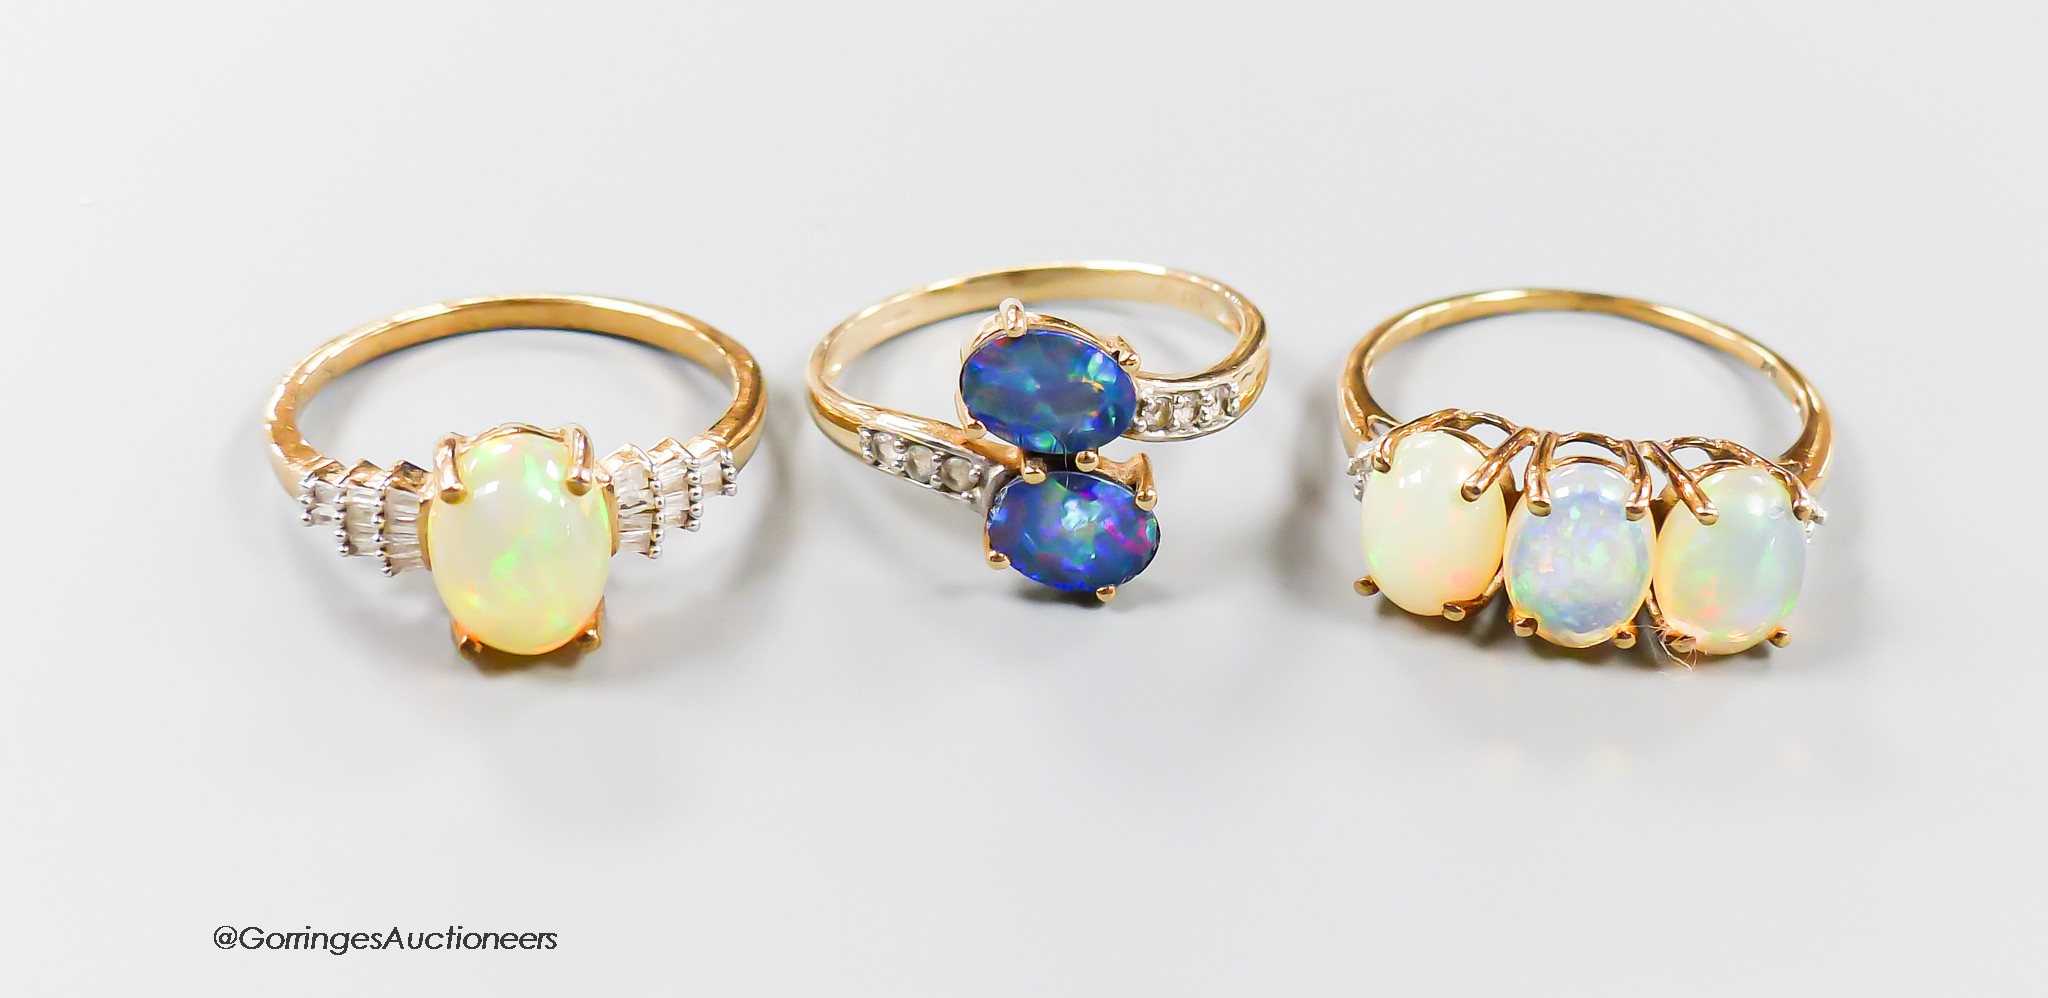 Two modern 9ct gold, opal and diamond set dress rings, size P & P/Q and one other 9ct gold and two stone opal doublet set dress ring, gross weight 6.8 grams.